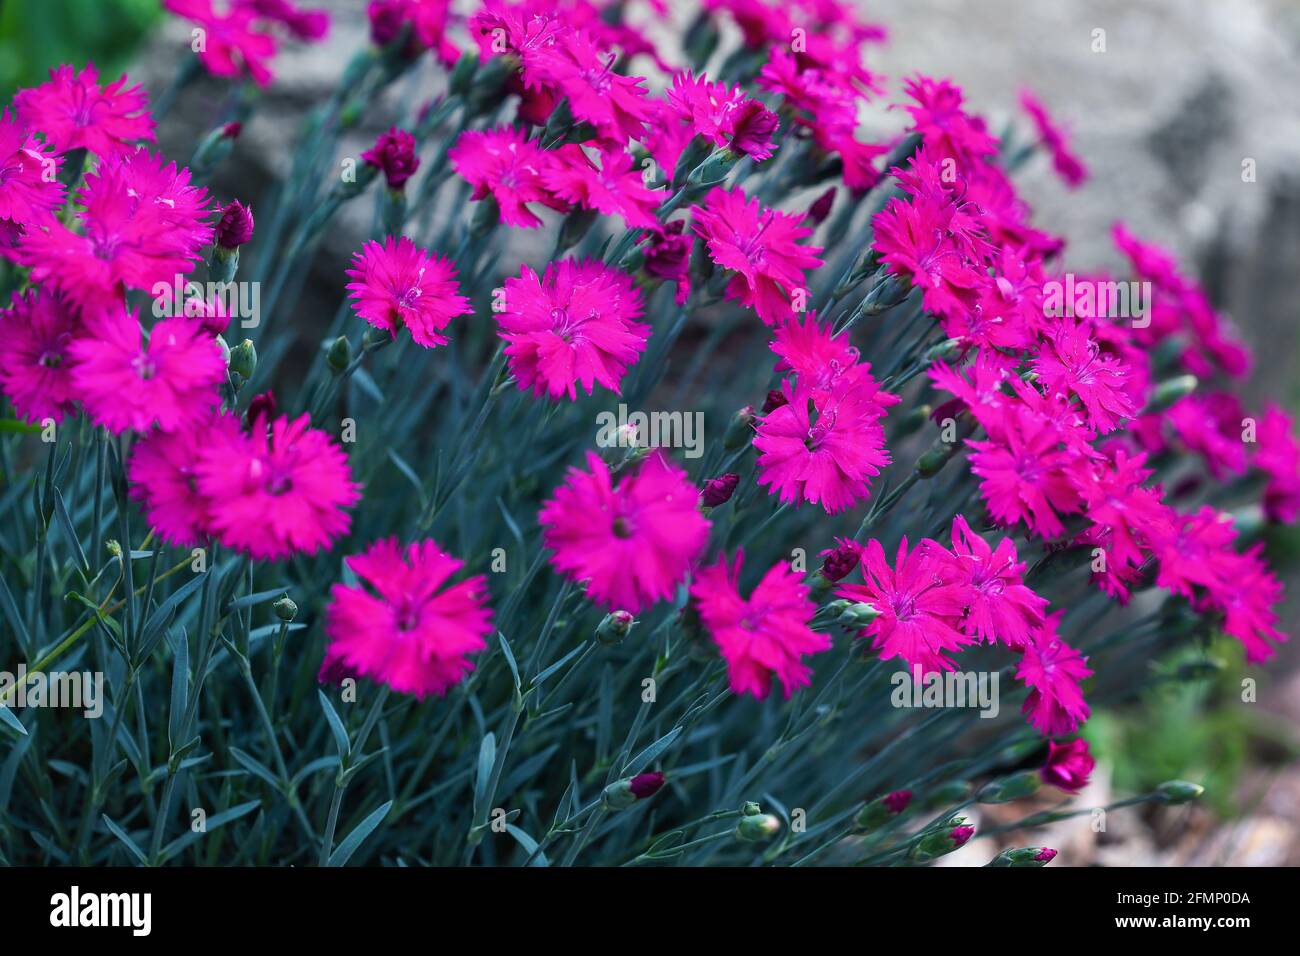 Fuschia colored Dianthus flowers, or Pinks, growing full bloom in the garden. Selective focus with blurred background. Stock Photo